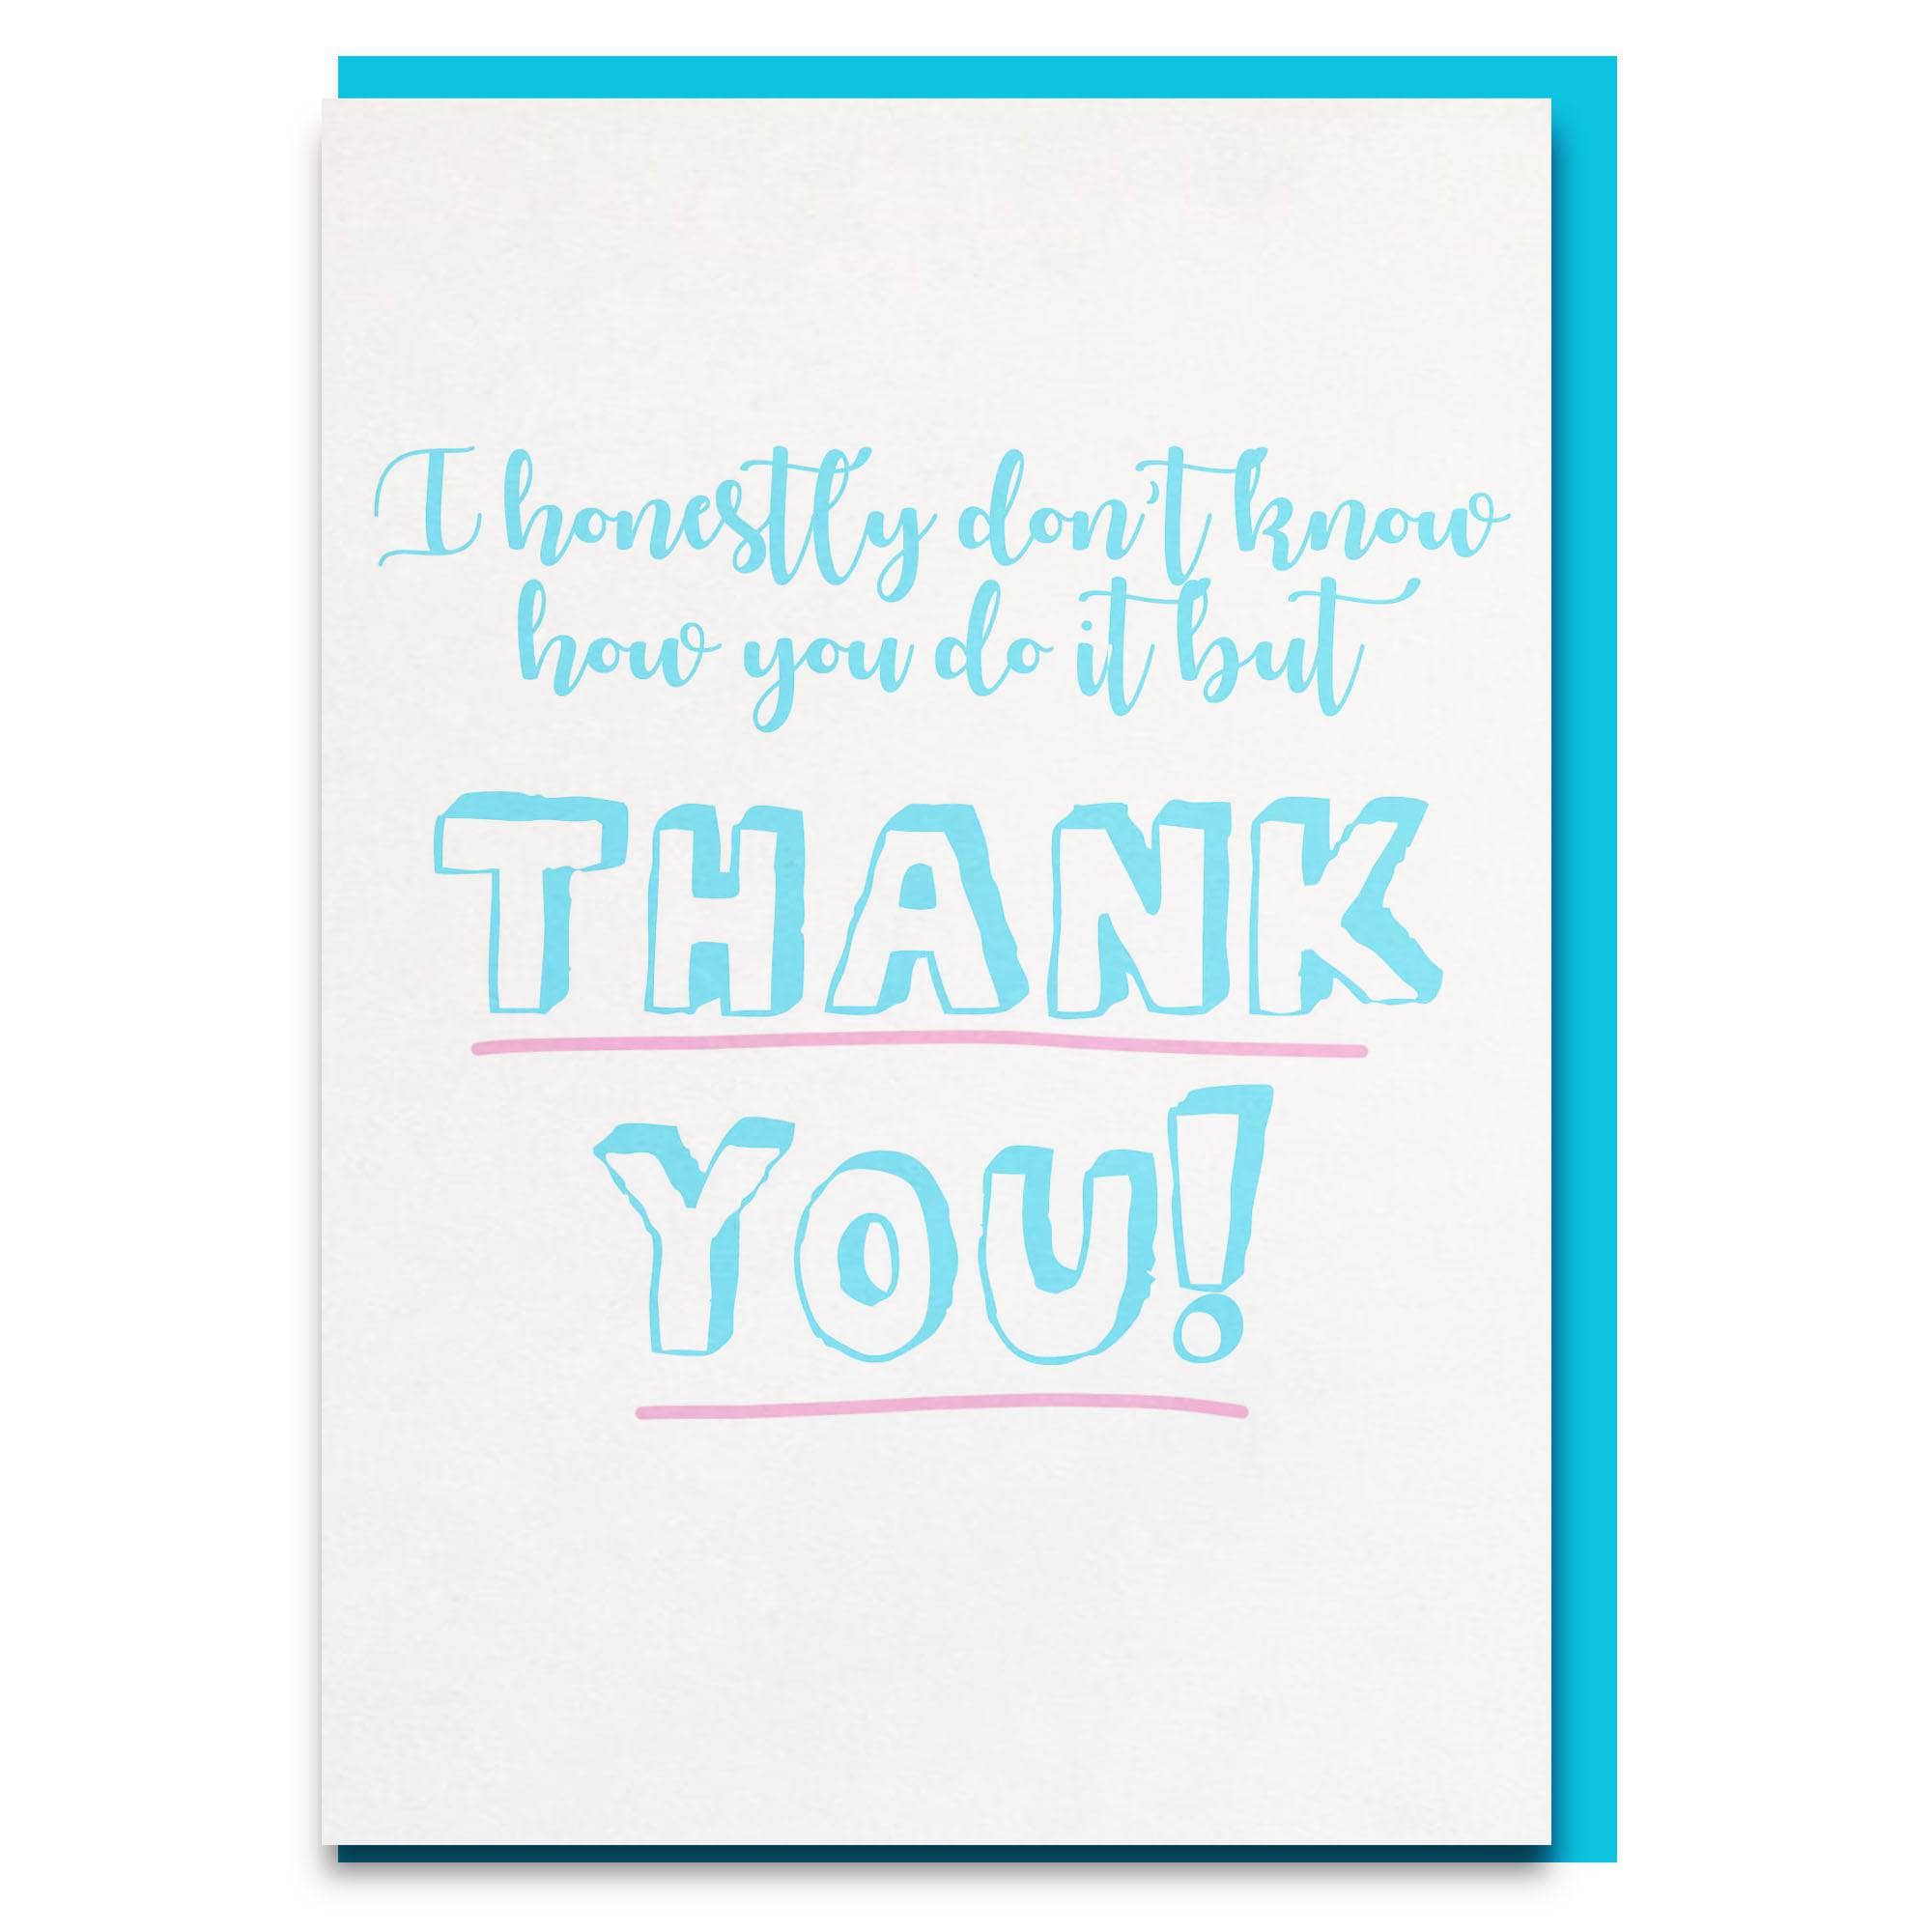 Funny and sweet and heartfelt thank you card for school teacher, nursery staff and teaching assistants